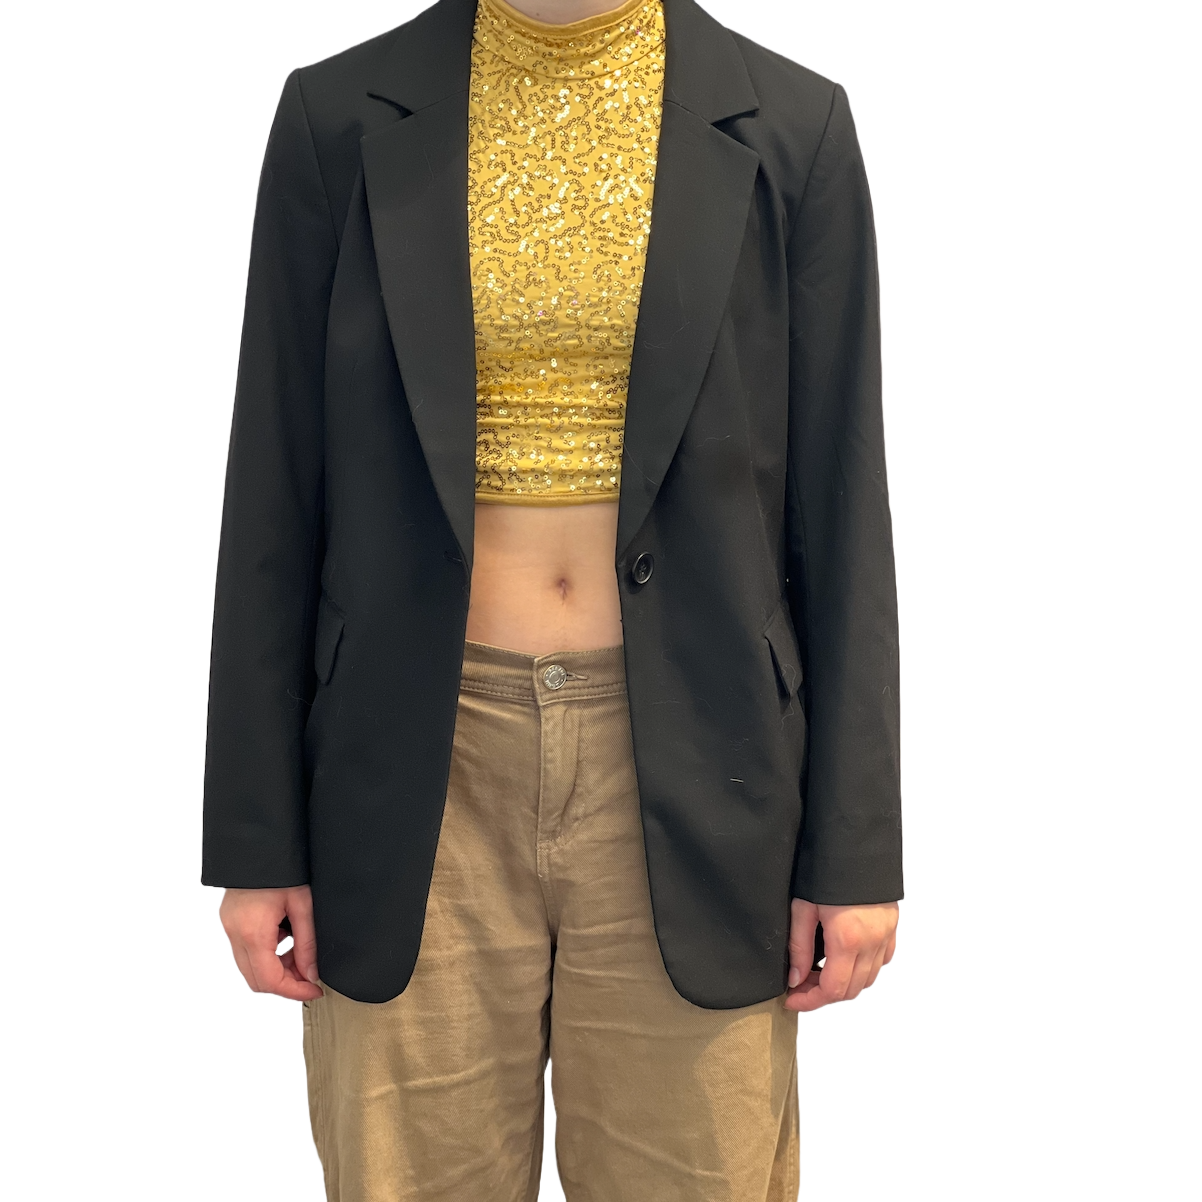 Black Jacket and Gold Top  Costume